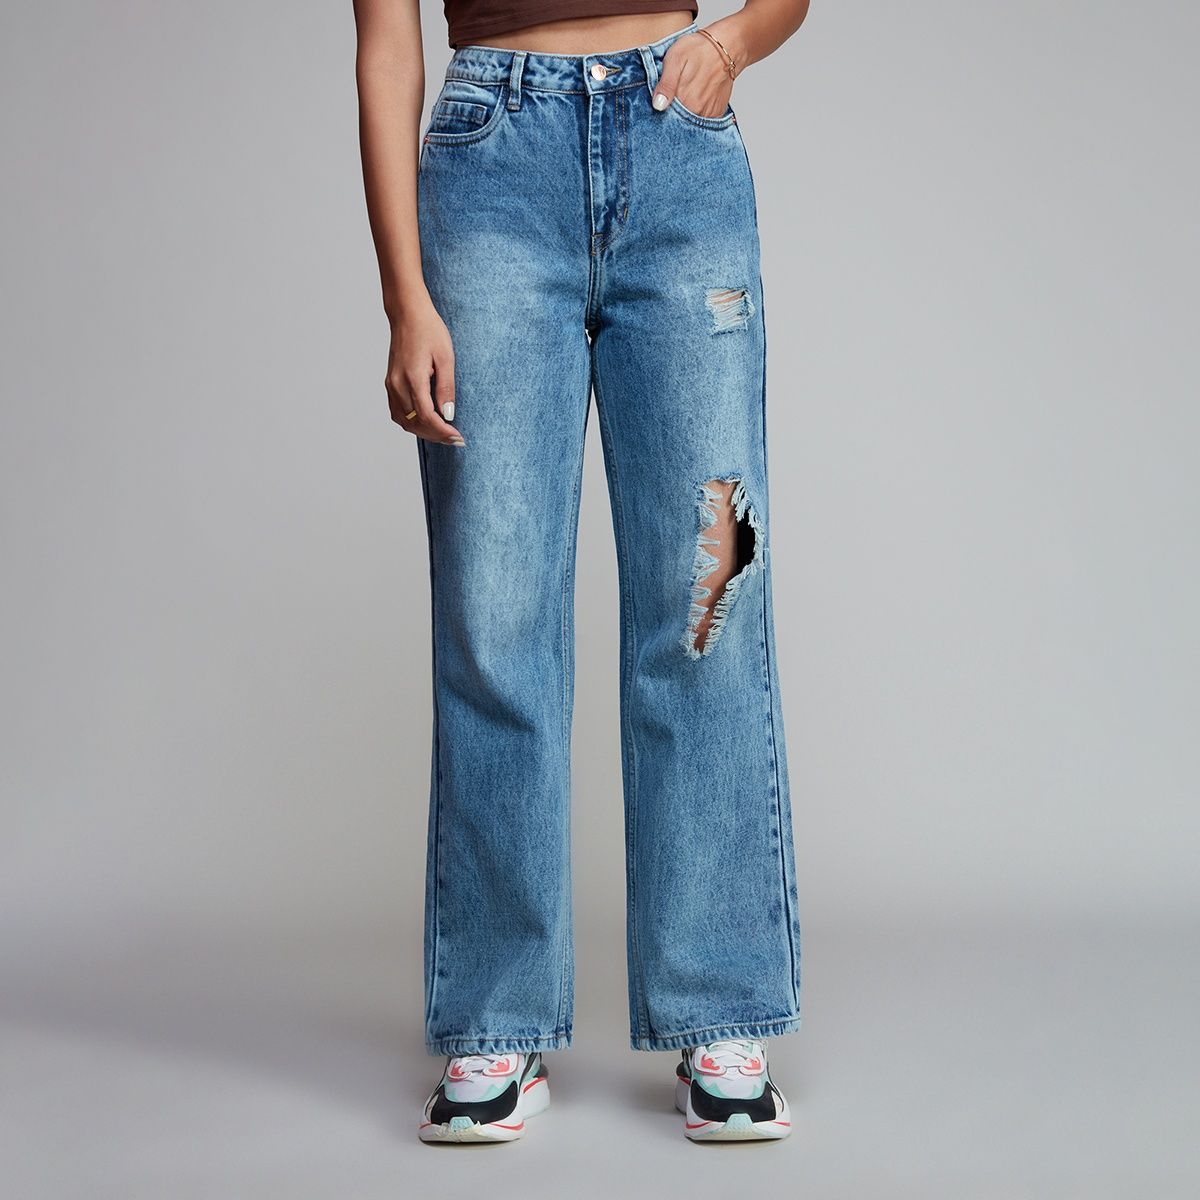 Buy Women Wide Leg Denim Pants High Waist Straight Oversized Plus Size  Baggy Flared Jeans Trousers (Dark Blue, M) at Amazon.in